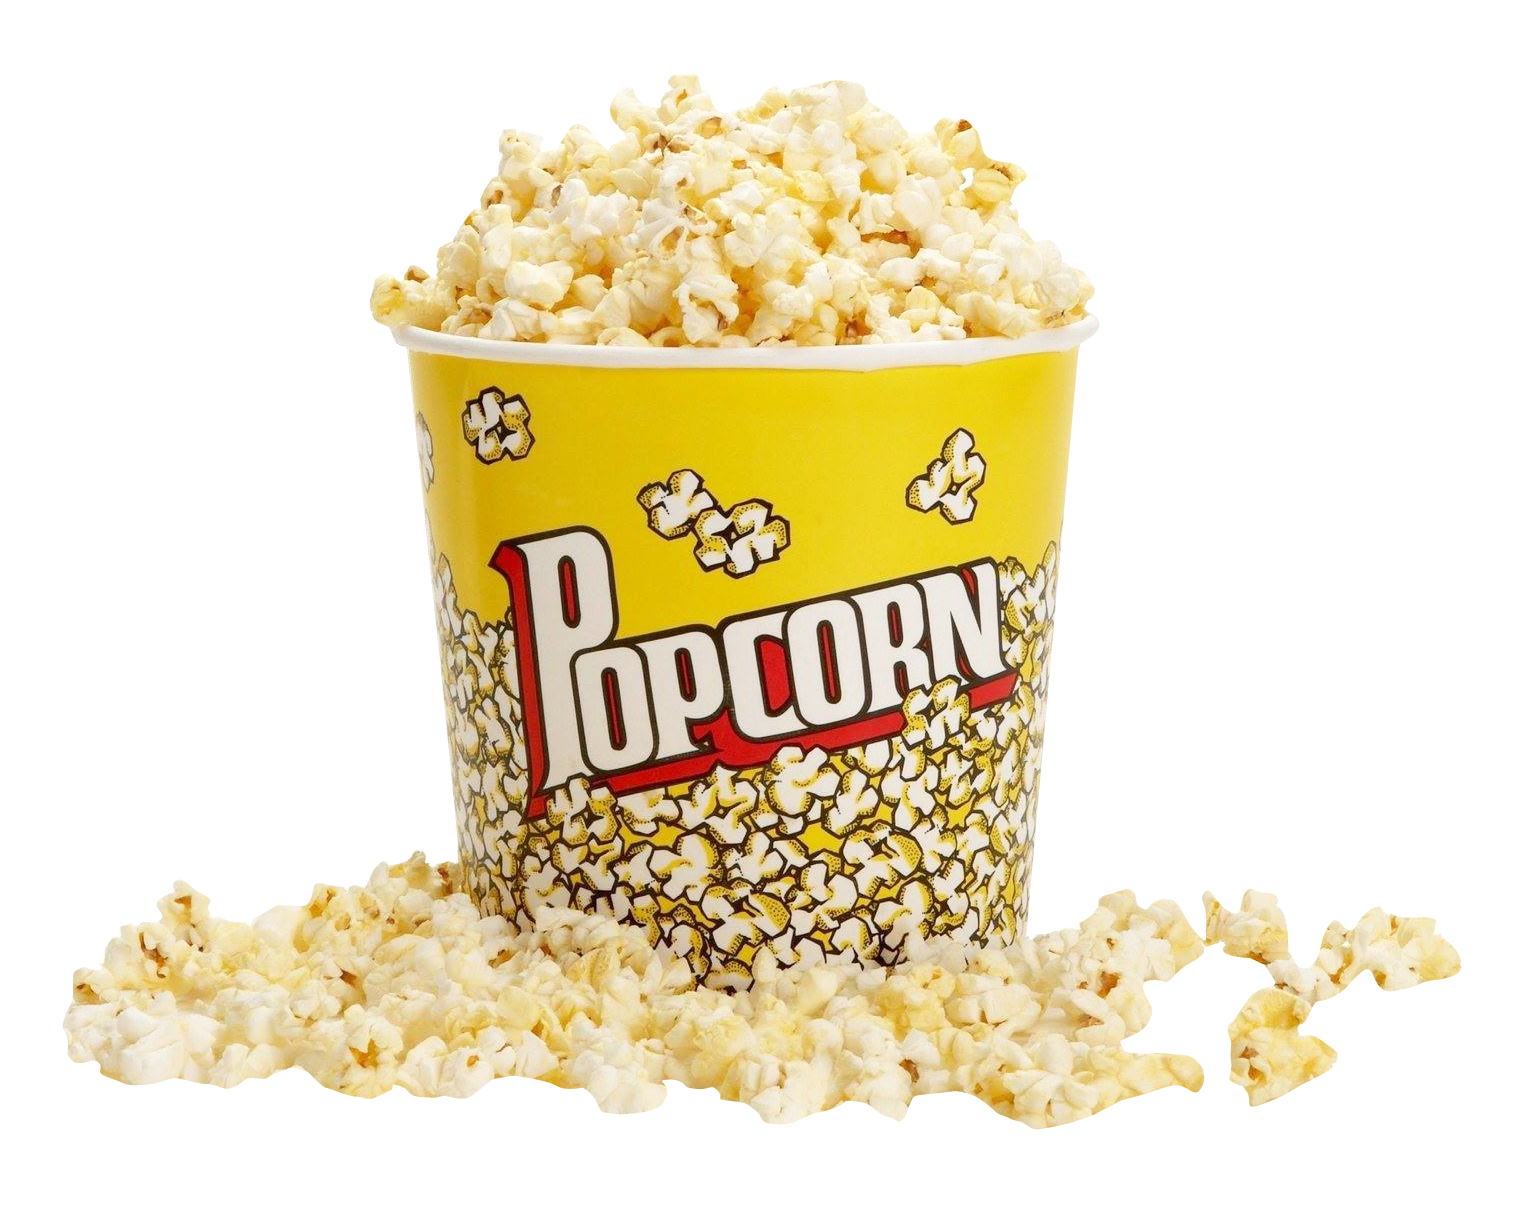 A Bucket Of Popcorn On Top Of A Pile Of Popcorn